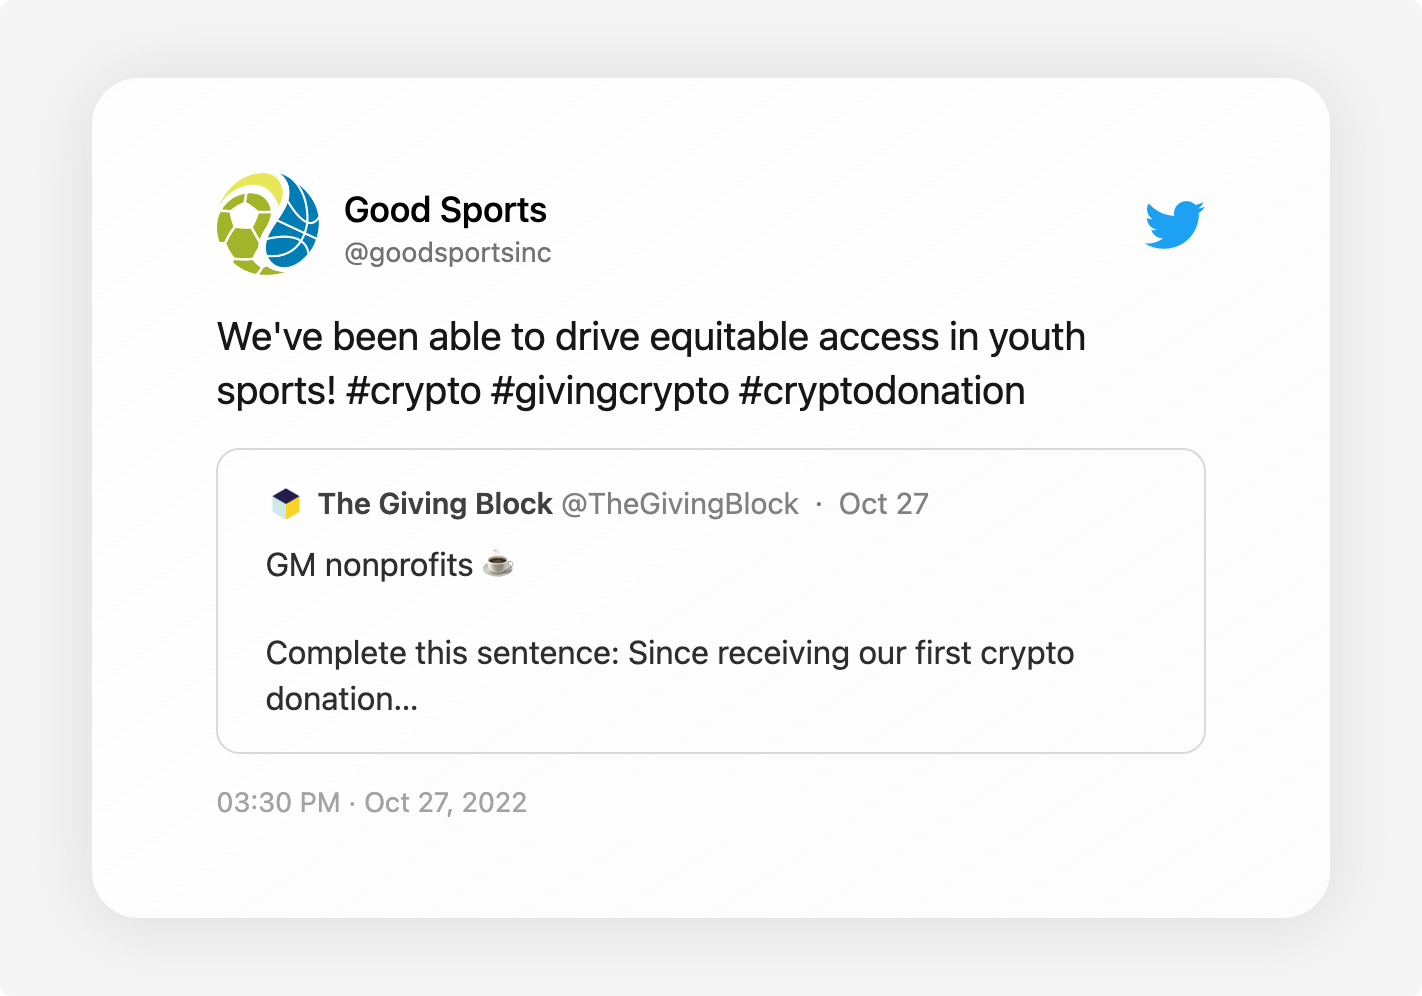 h twitter - Nonprofits Are Sharing How They Use Their Crypto Donations | The Giving Block